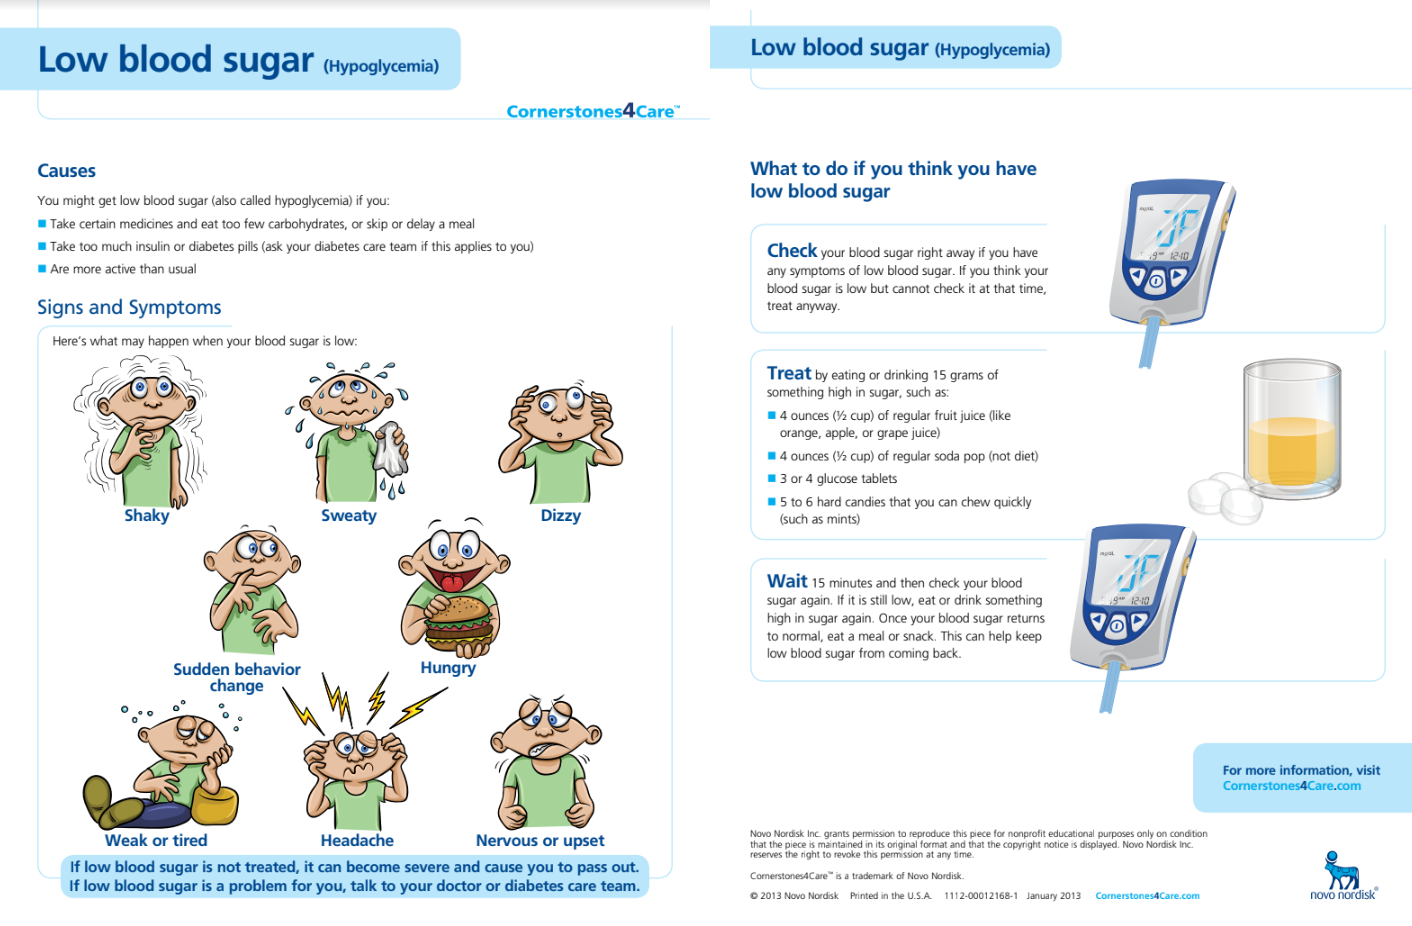 Dealing with low blood sugar in school